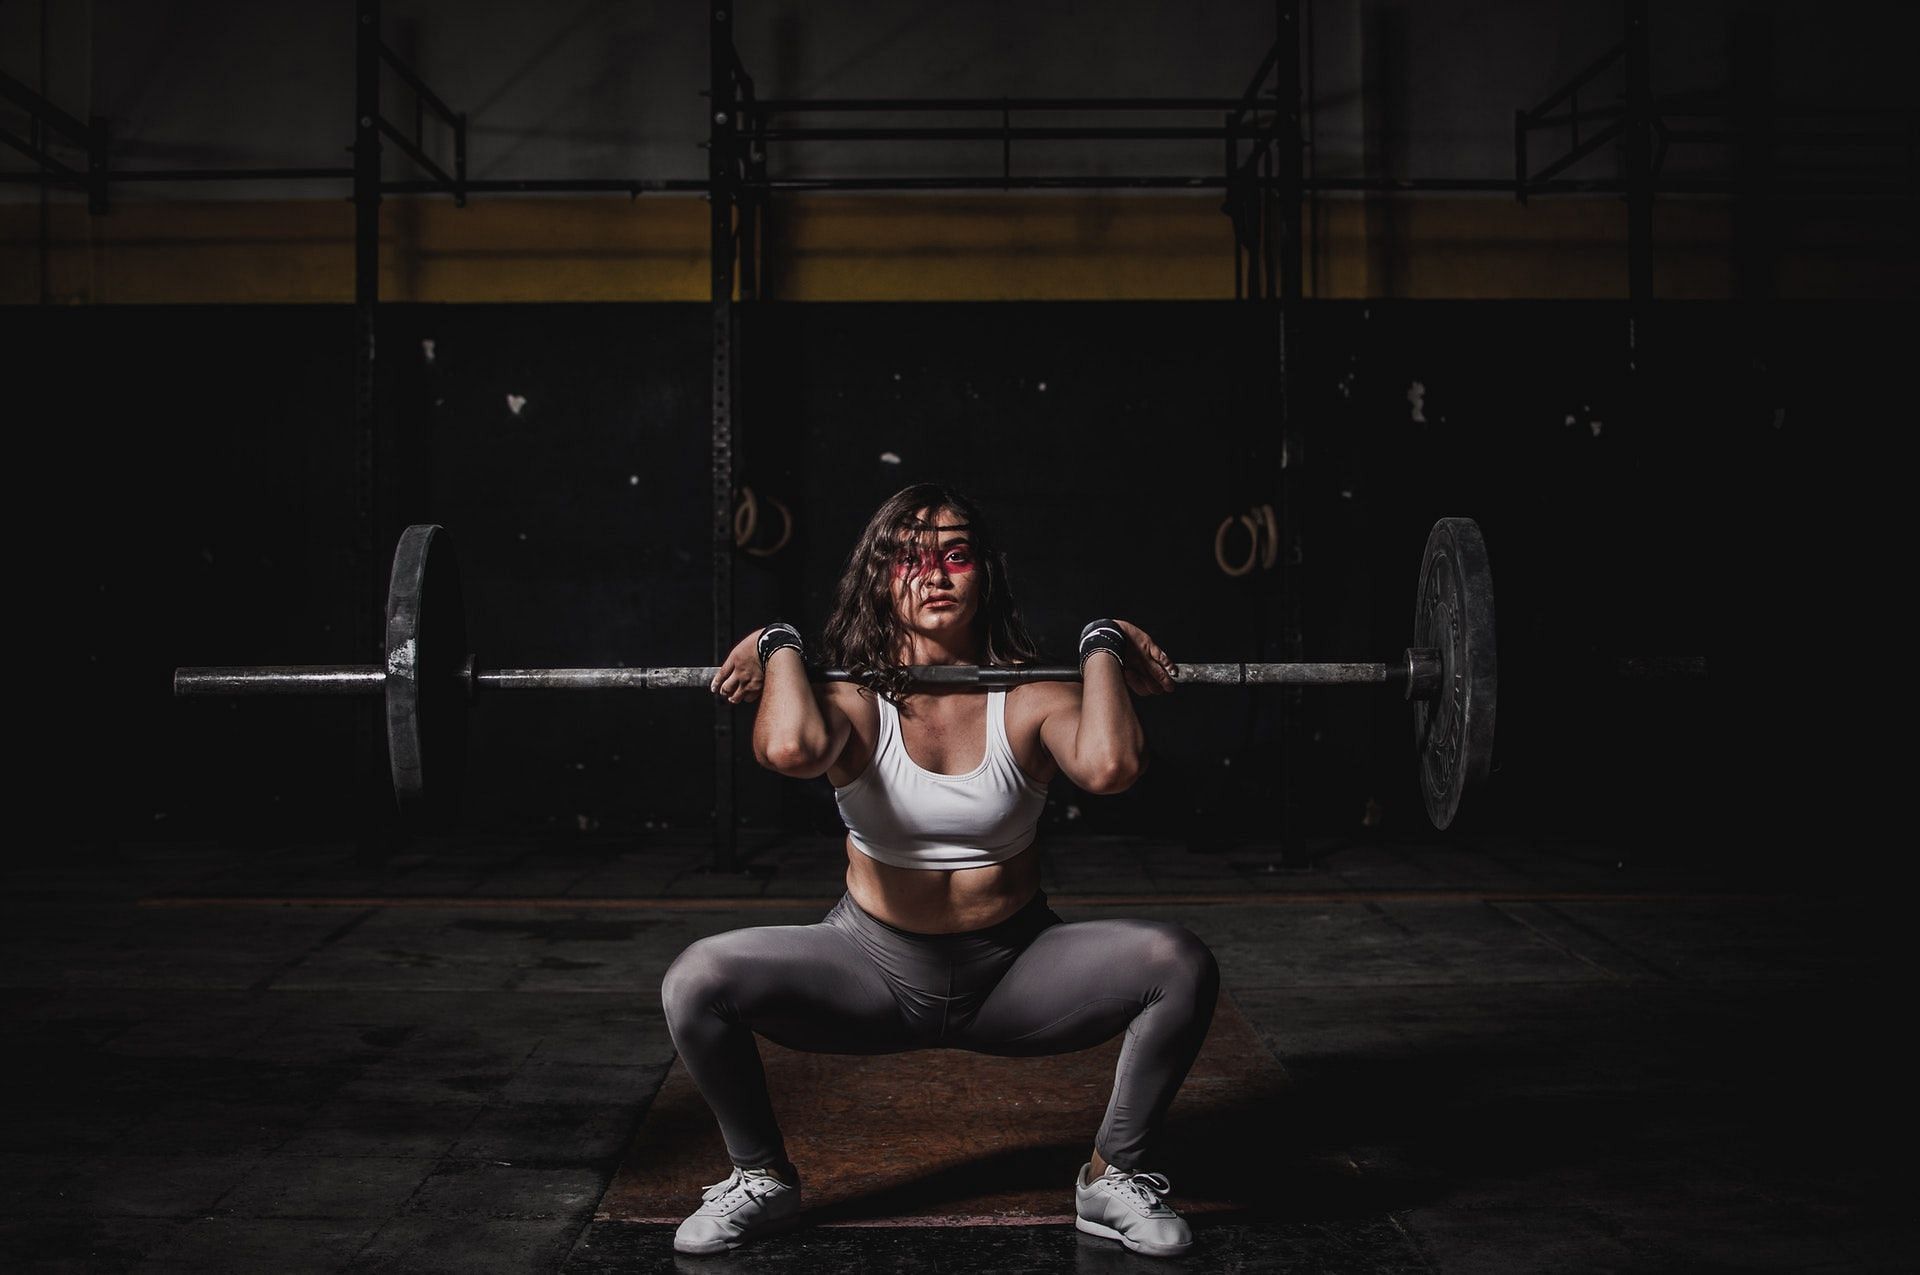 There are several challenging exercises you can do at the gym. (Photo by Leon Ardho via pexels)